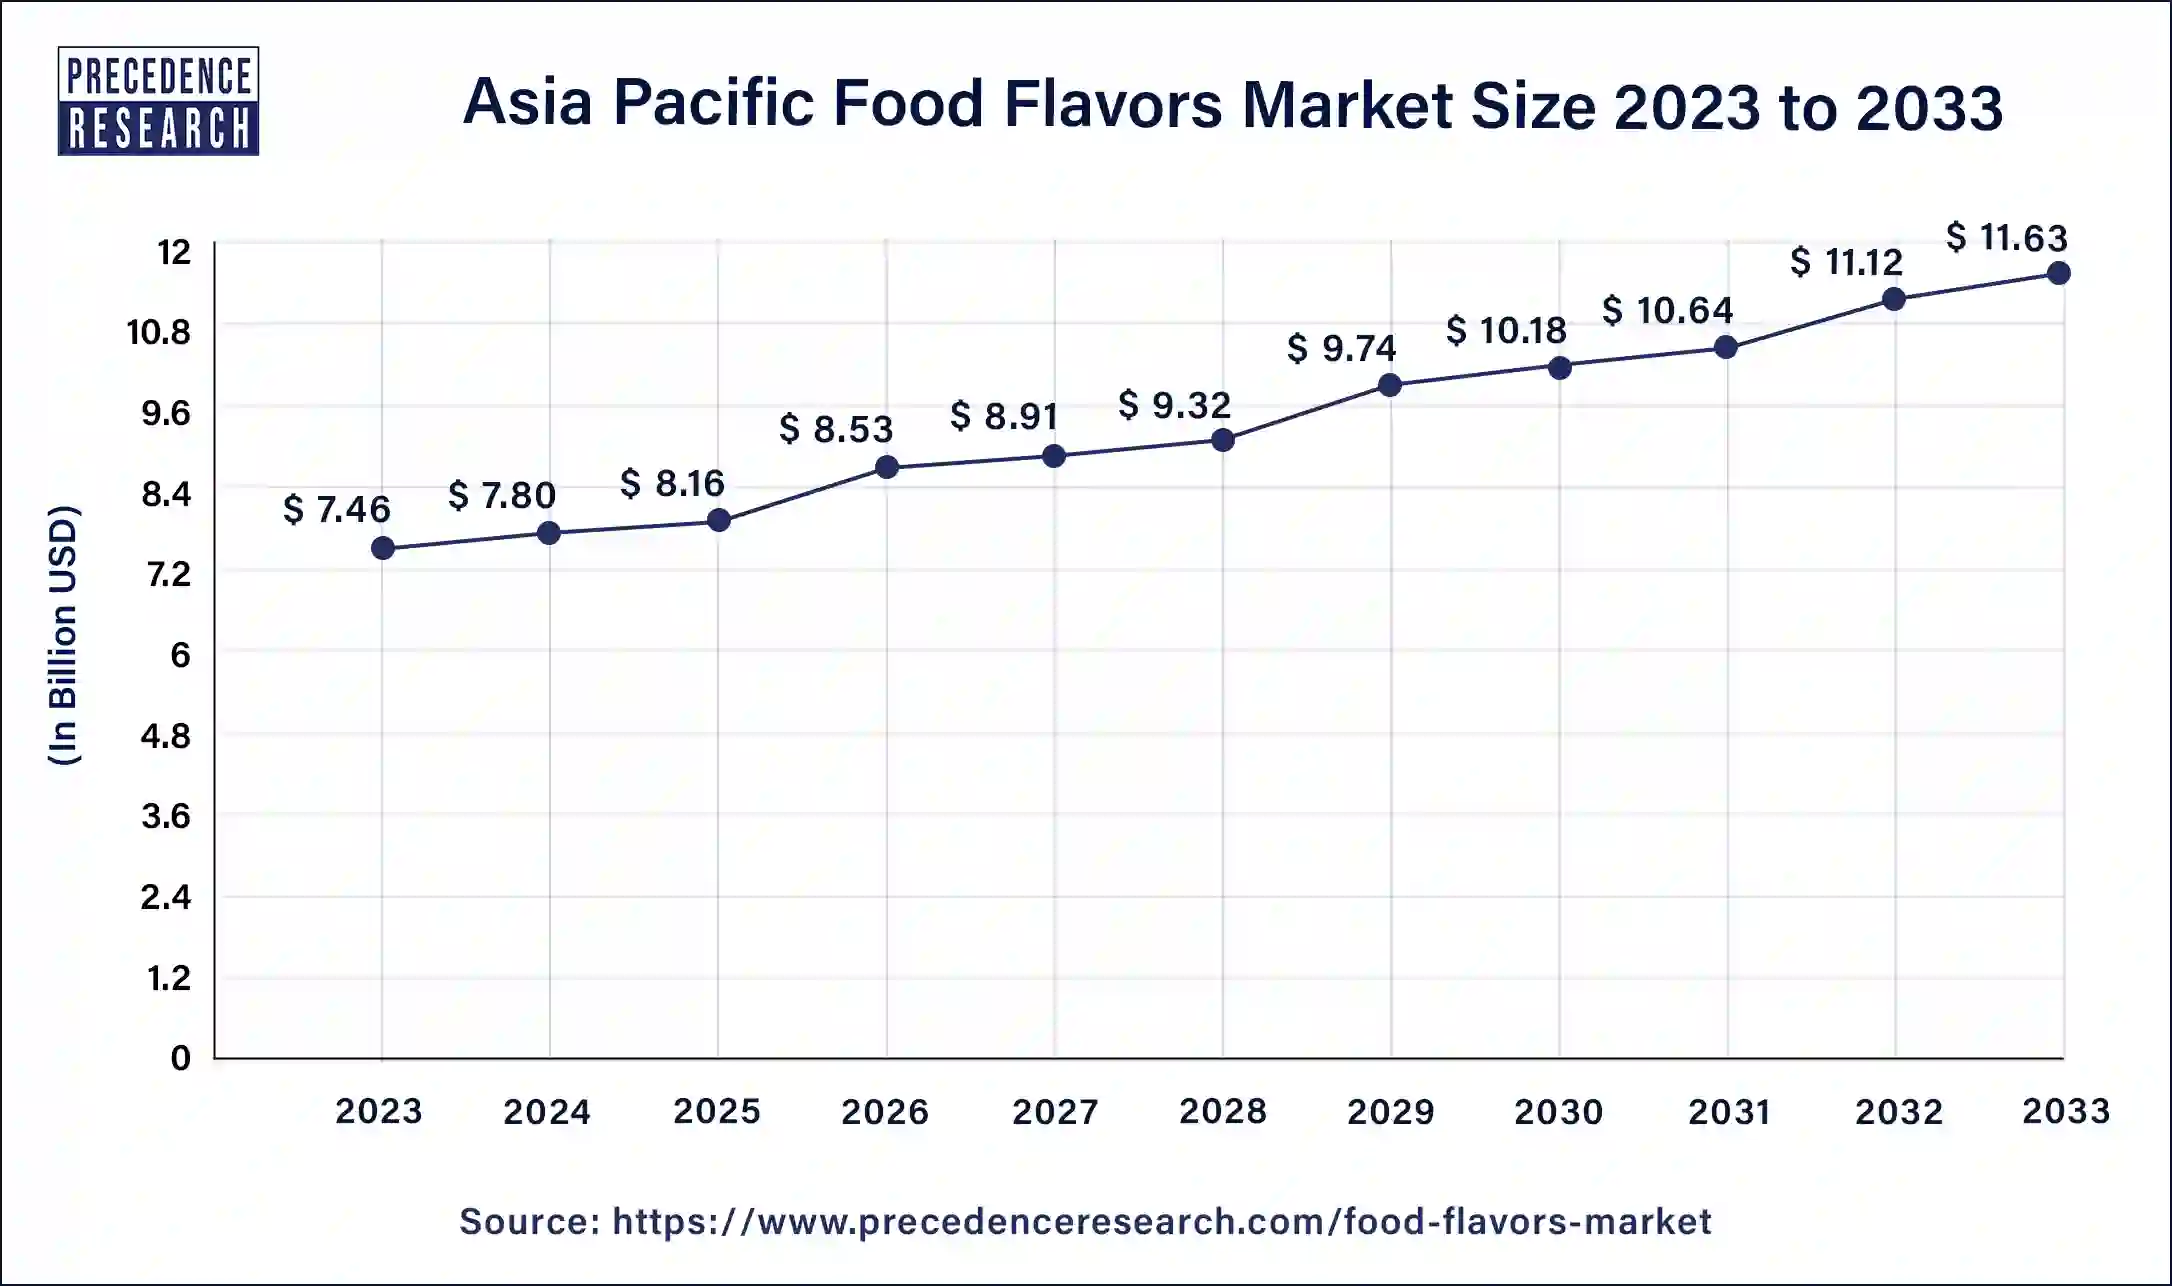 Asia Pacific Food Flavors Market Size 2024 to 2033